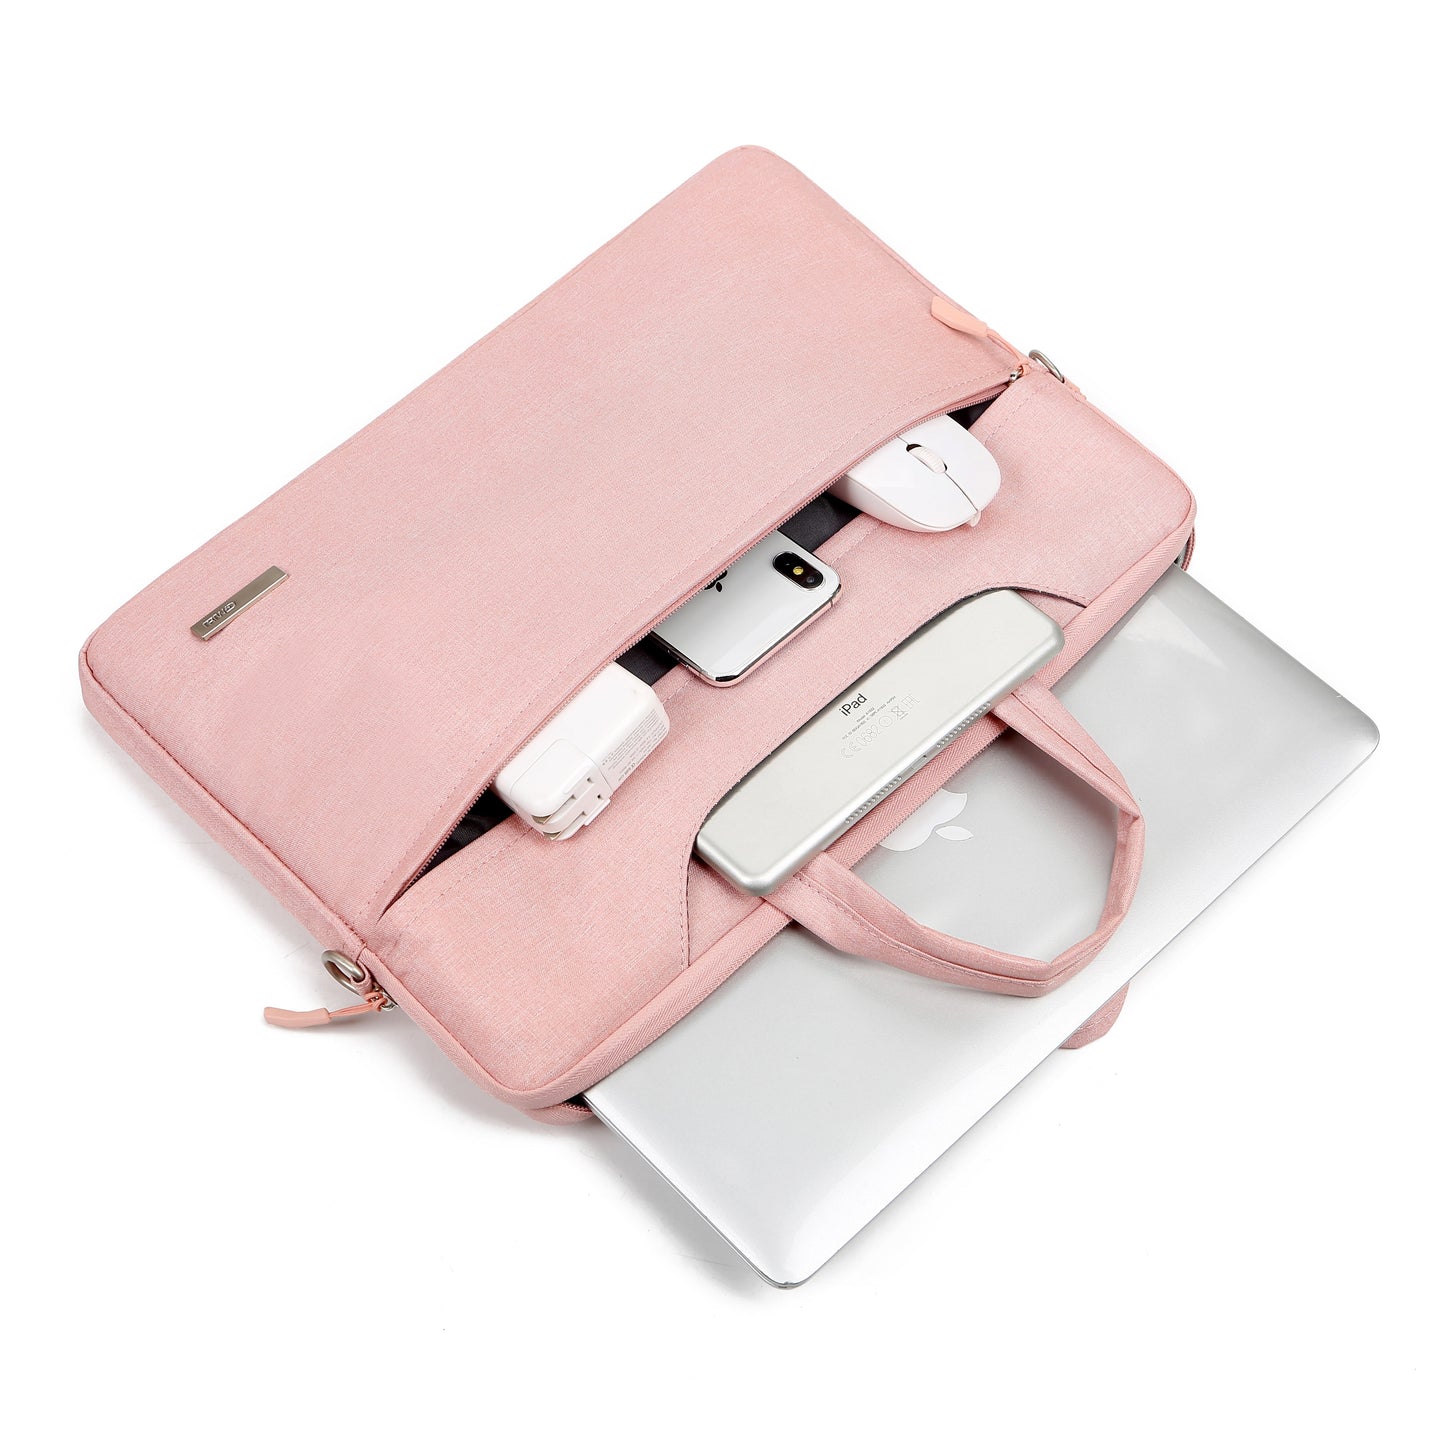 Sofia Protective Laptop Bag with Matching Accessories